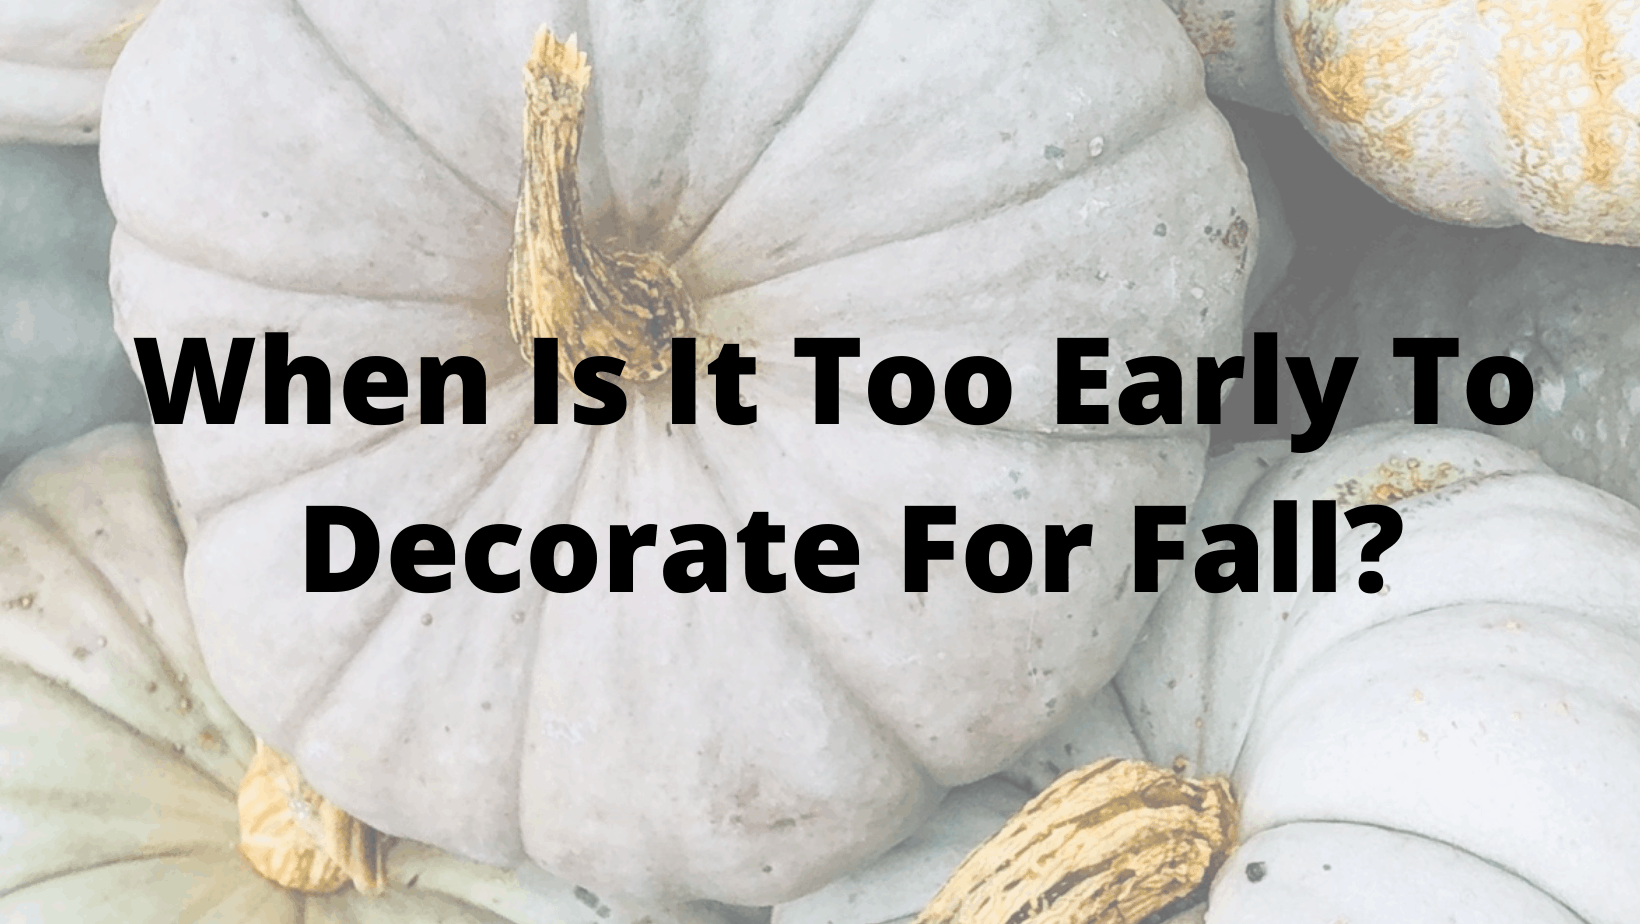 is-it-too-early-decorate-for-fall